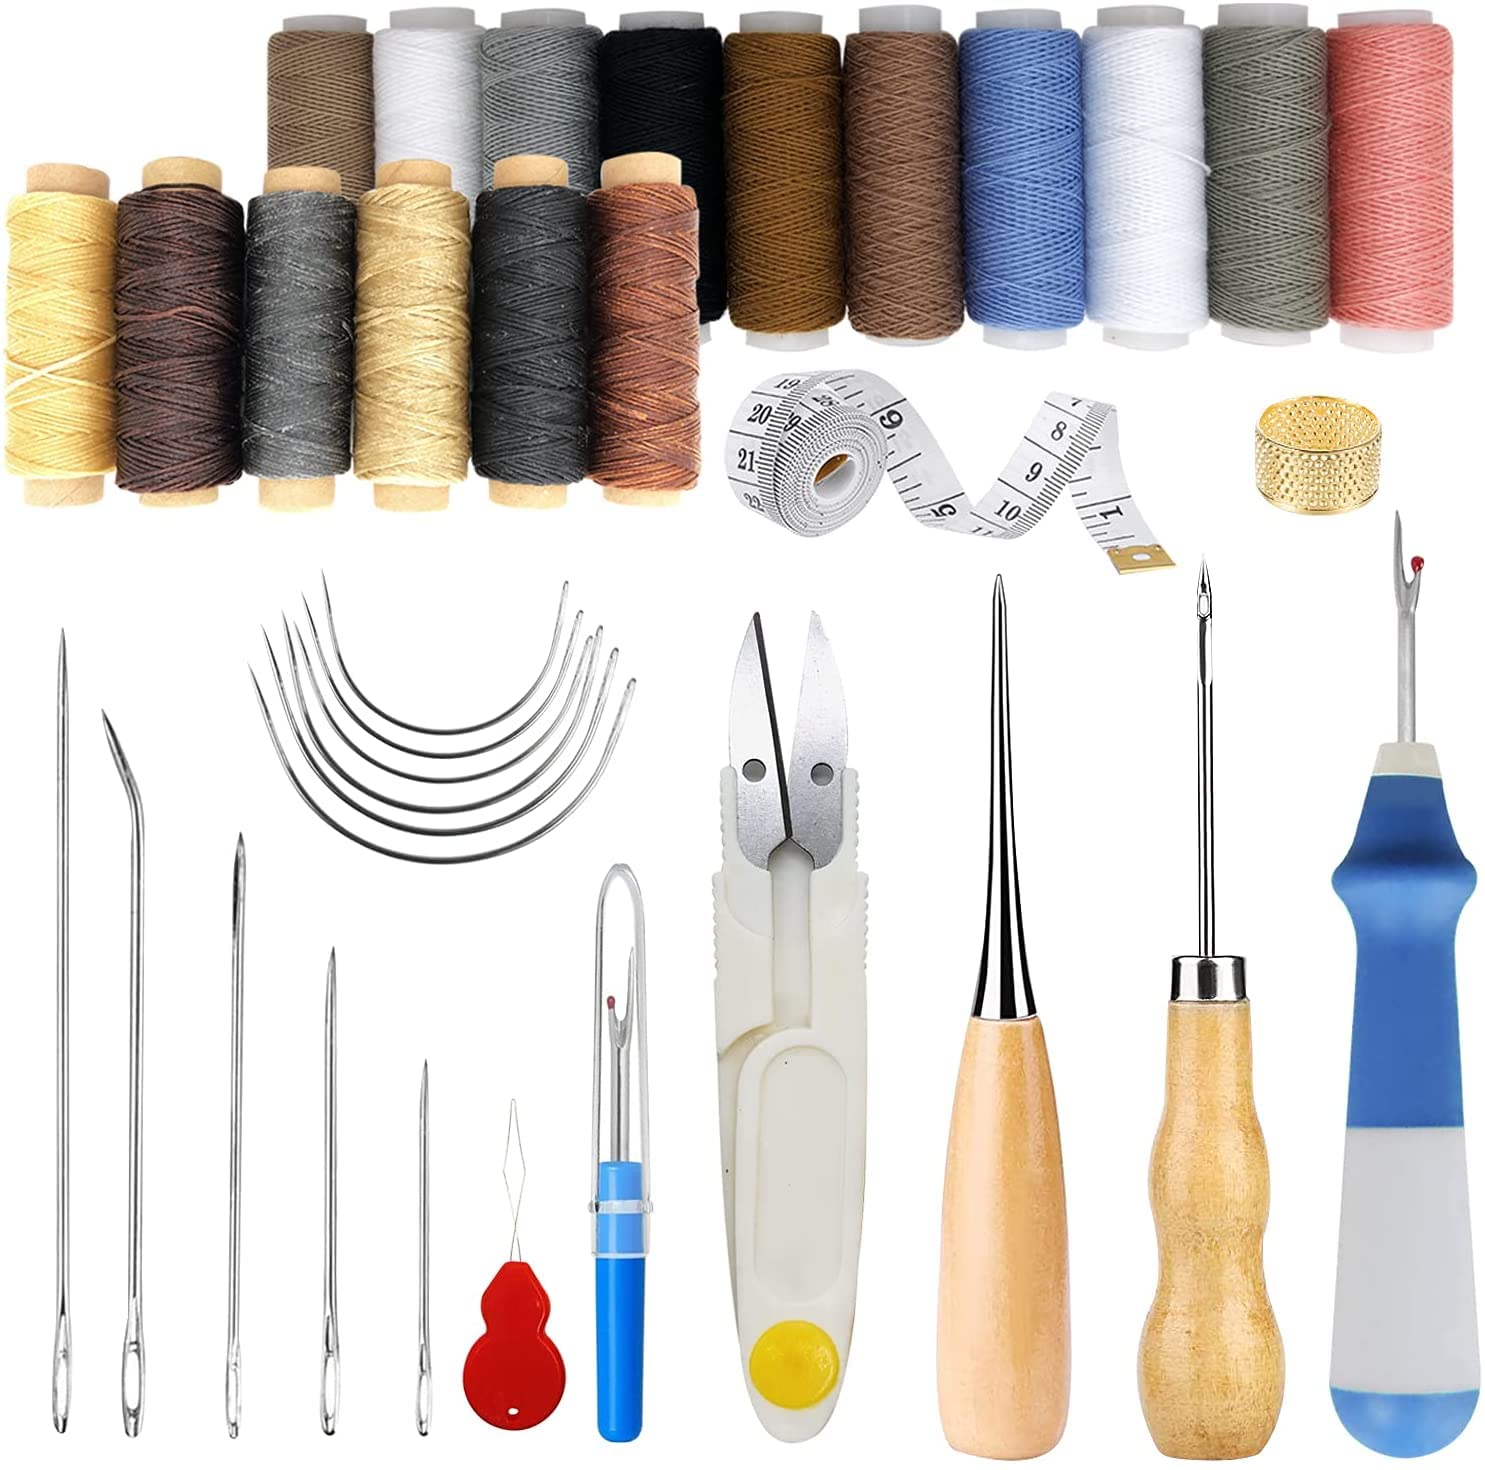 18Pcs Vintage Leather Craft Kit Stitching Sewing Beveler Punch Working Hand  Tools